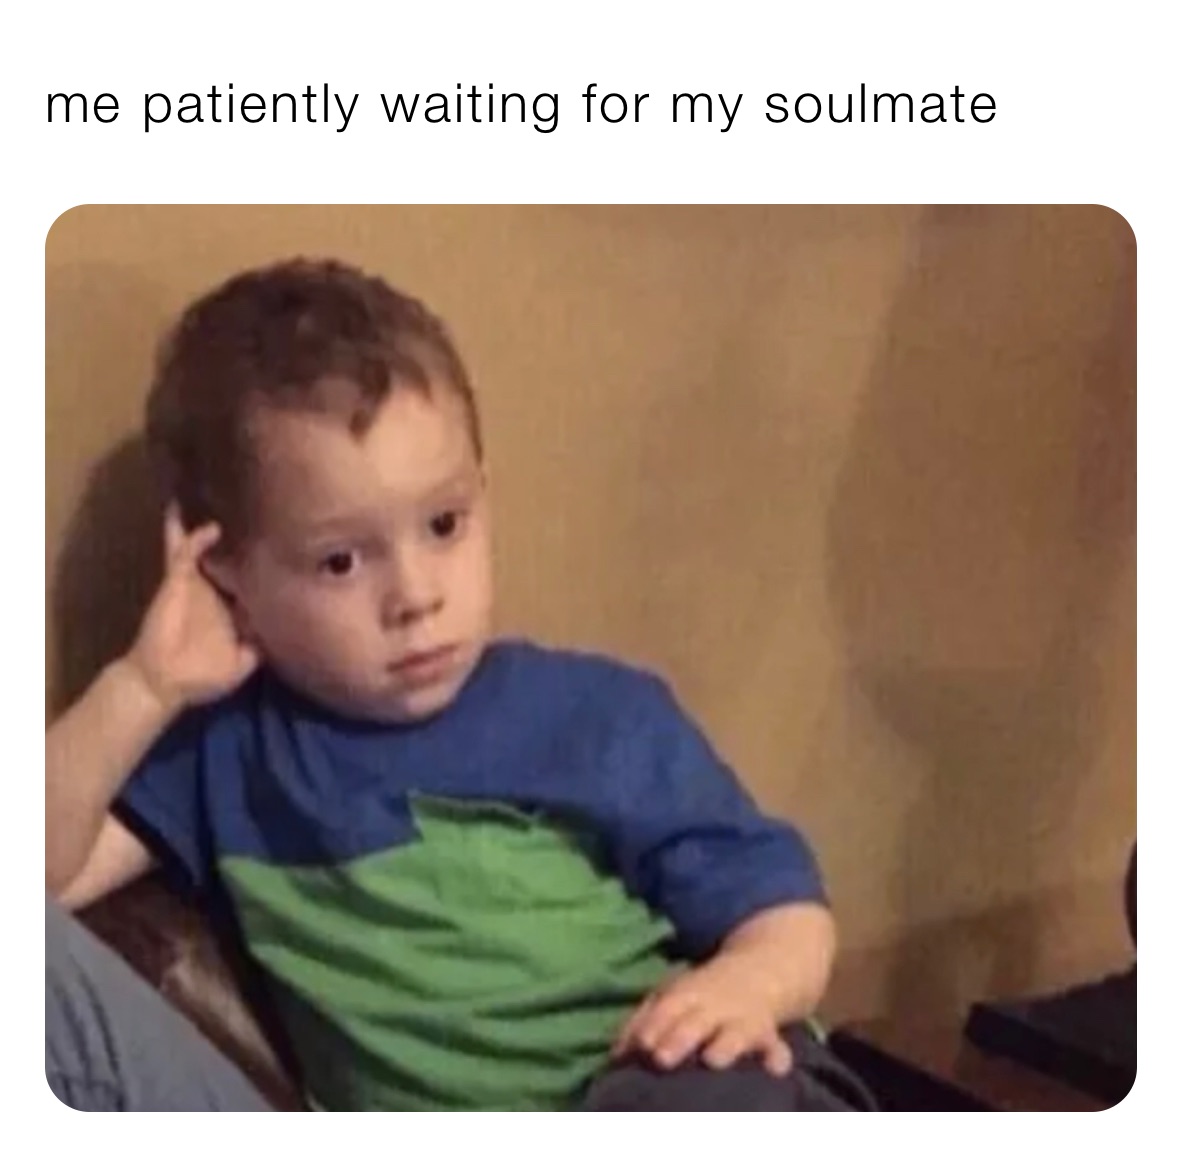 me patiently waiting for my soulmate